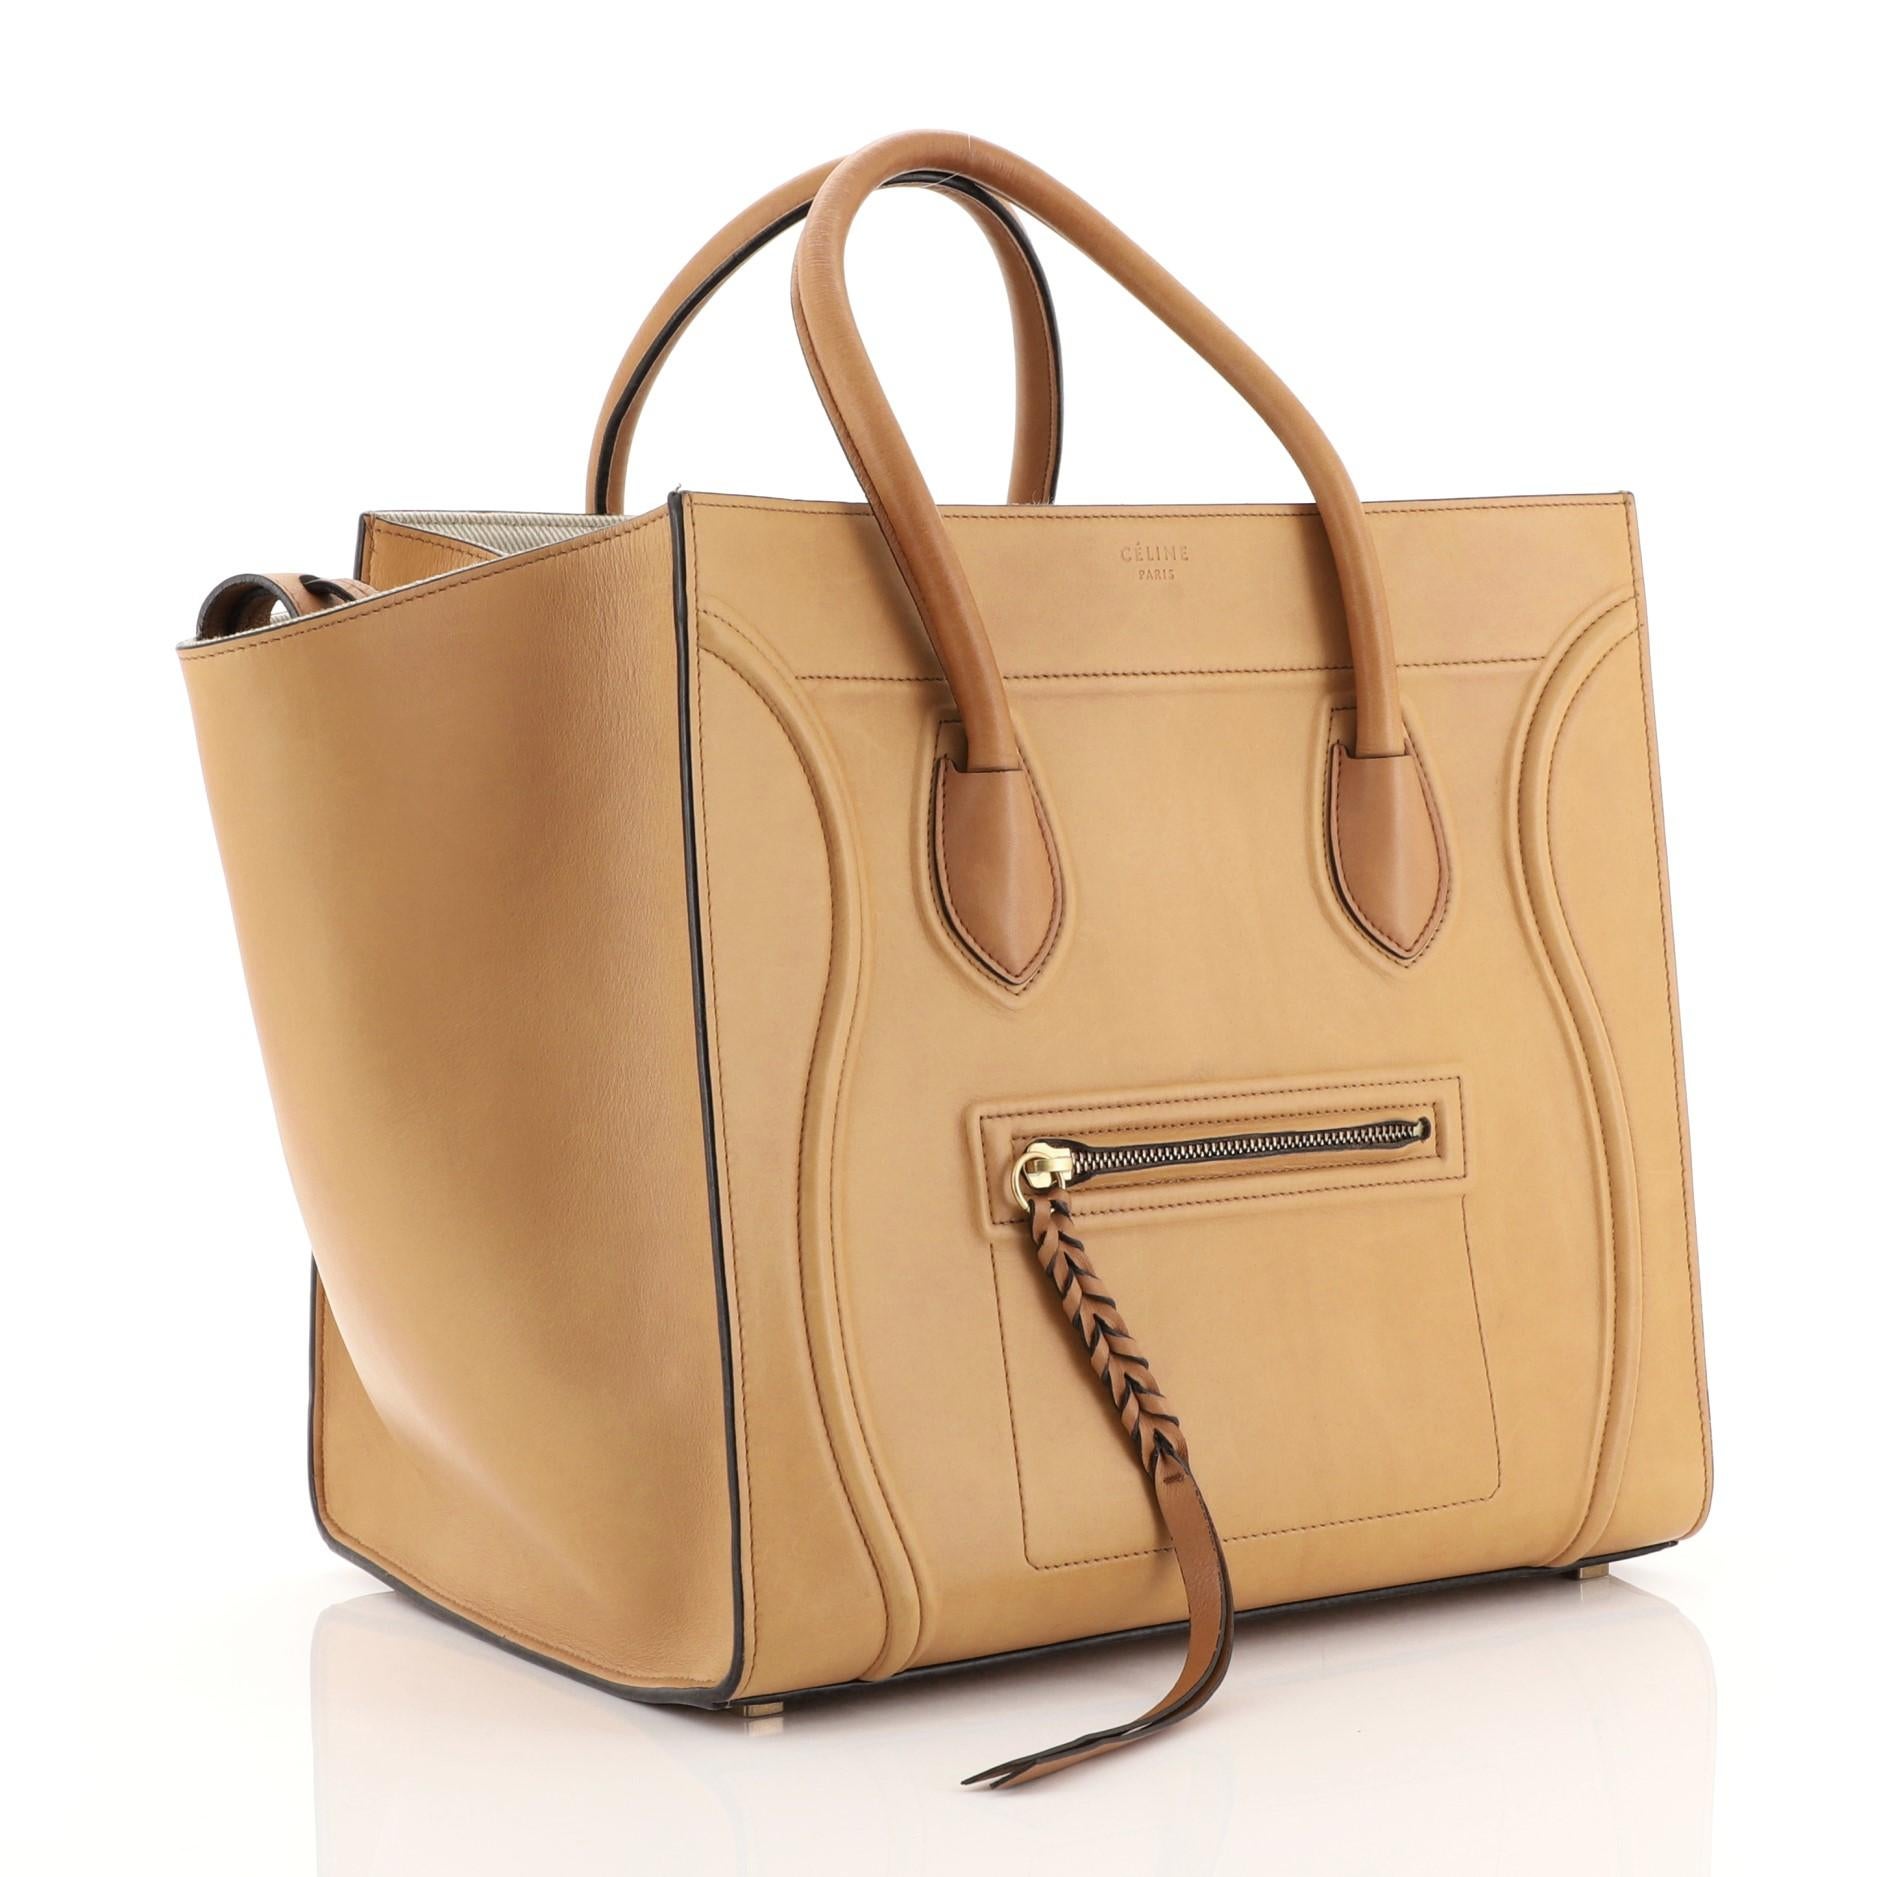 This Celine Phantom Bag Smooth Leather Medium, crafted in brown smooth leather, features dual rolled handles, front zip pocket, and gold-tone hardware. It opens to a neutral fabric interior with side zip pocket. 

Estimated Retail Price: